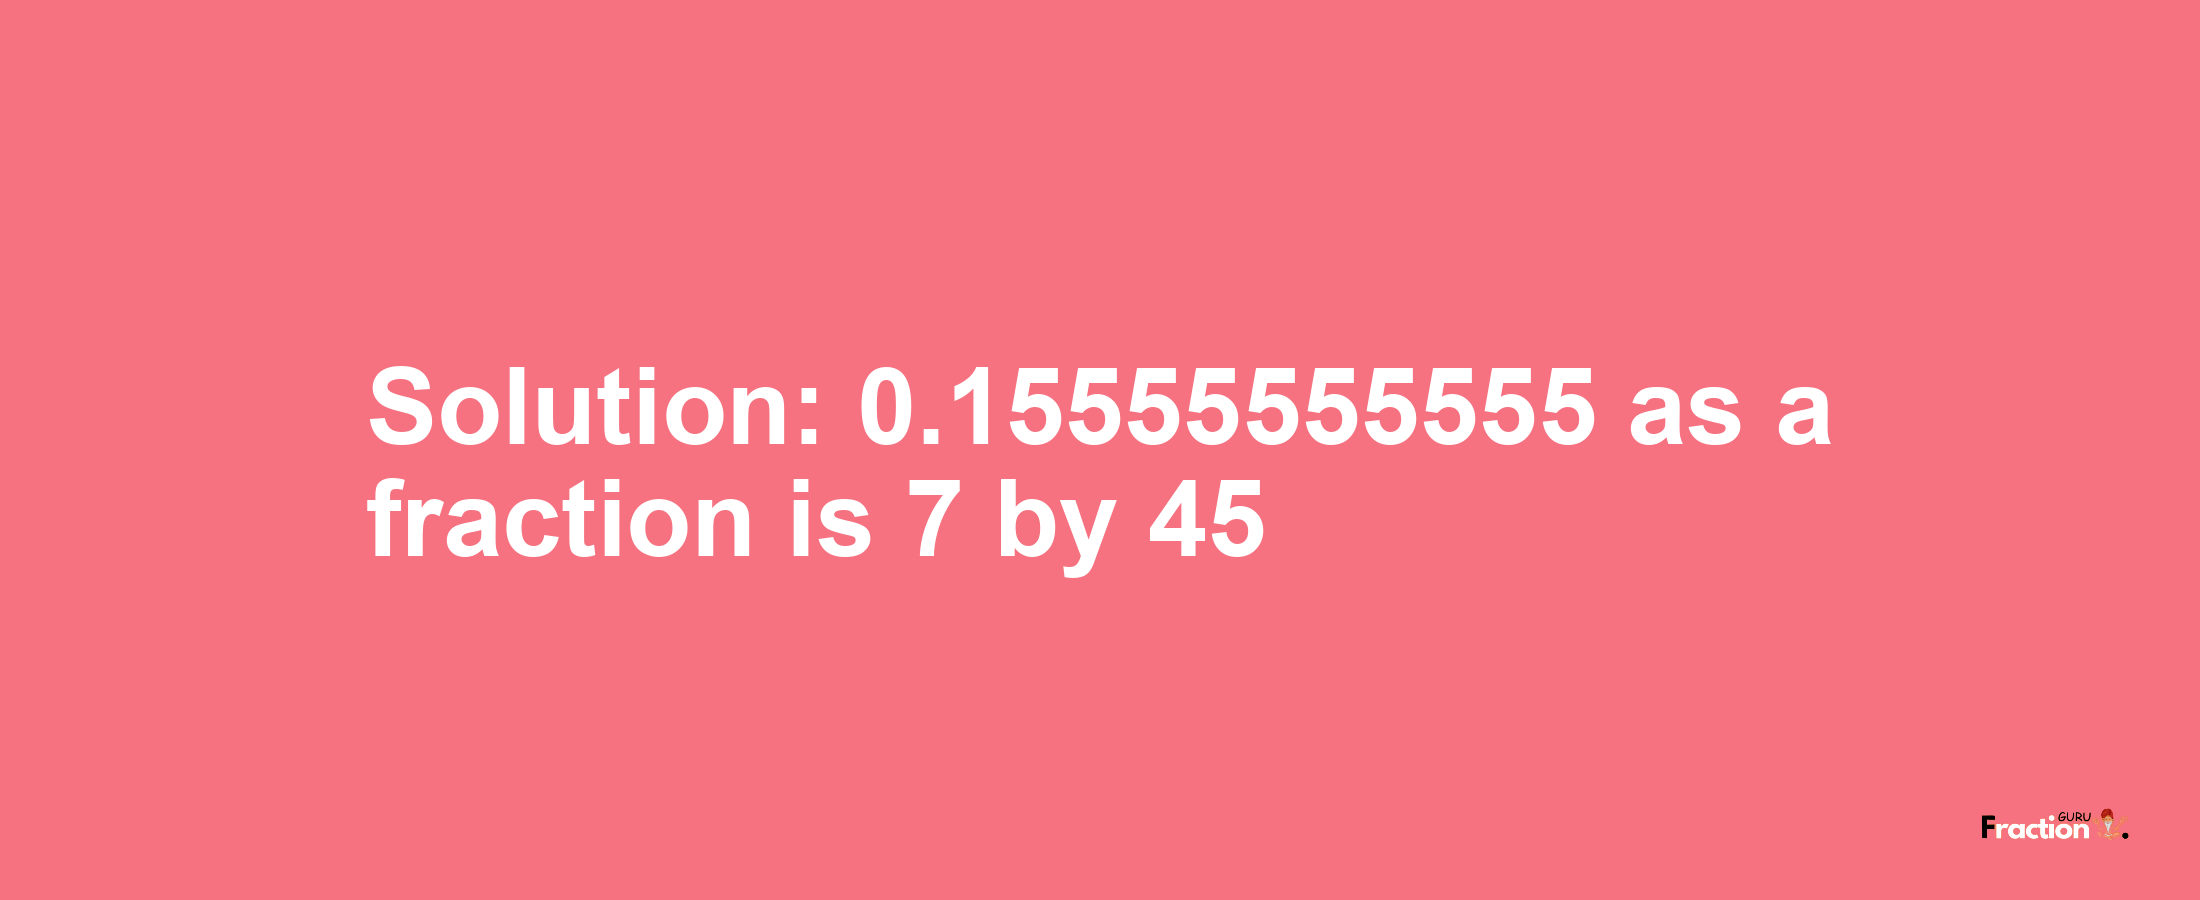 Solution:0.15555555555 as a fraction is 7/45